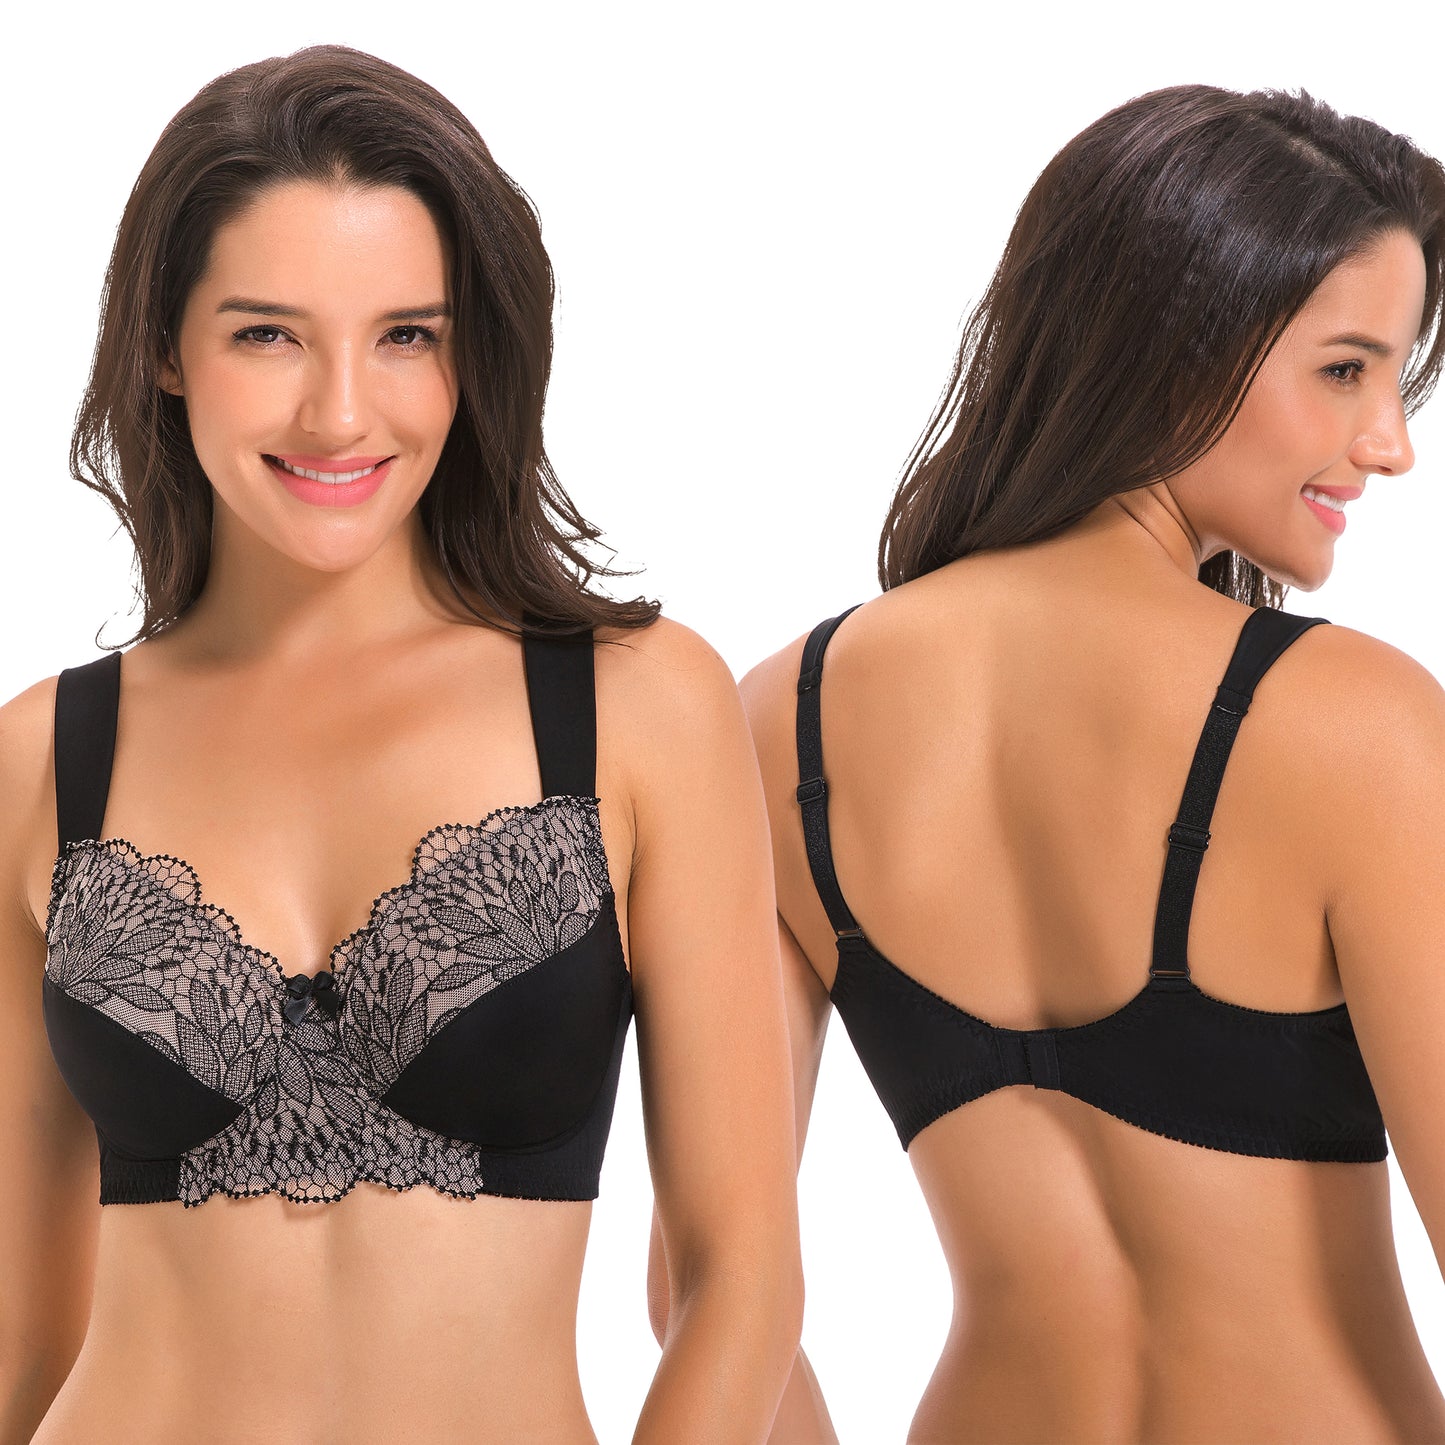 Plus Size Unlined Minimizer Wirefree Bras with Embroidery Lace-3Pack-Grey,Pink,Black